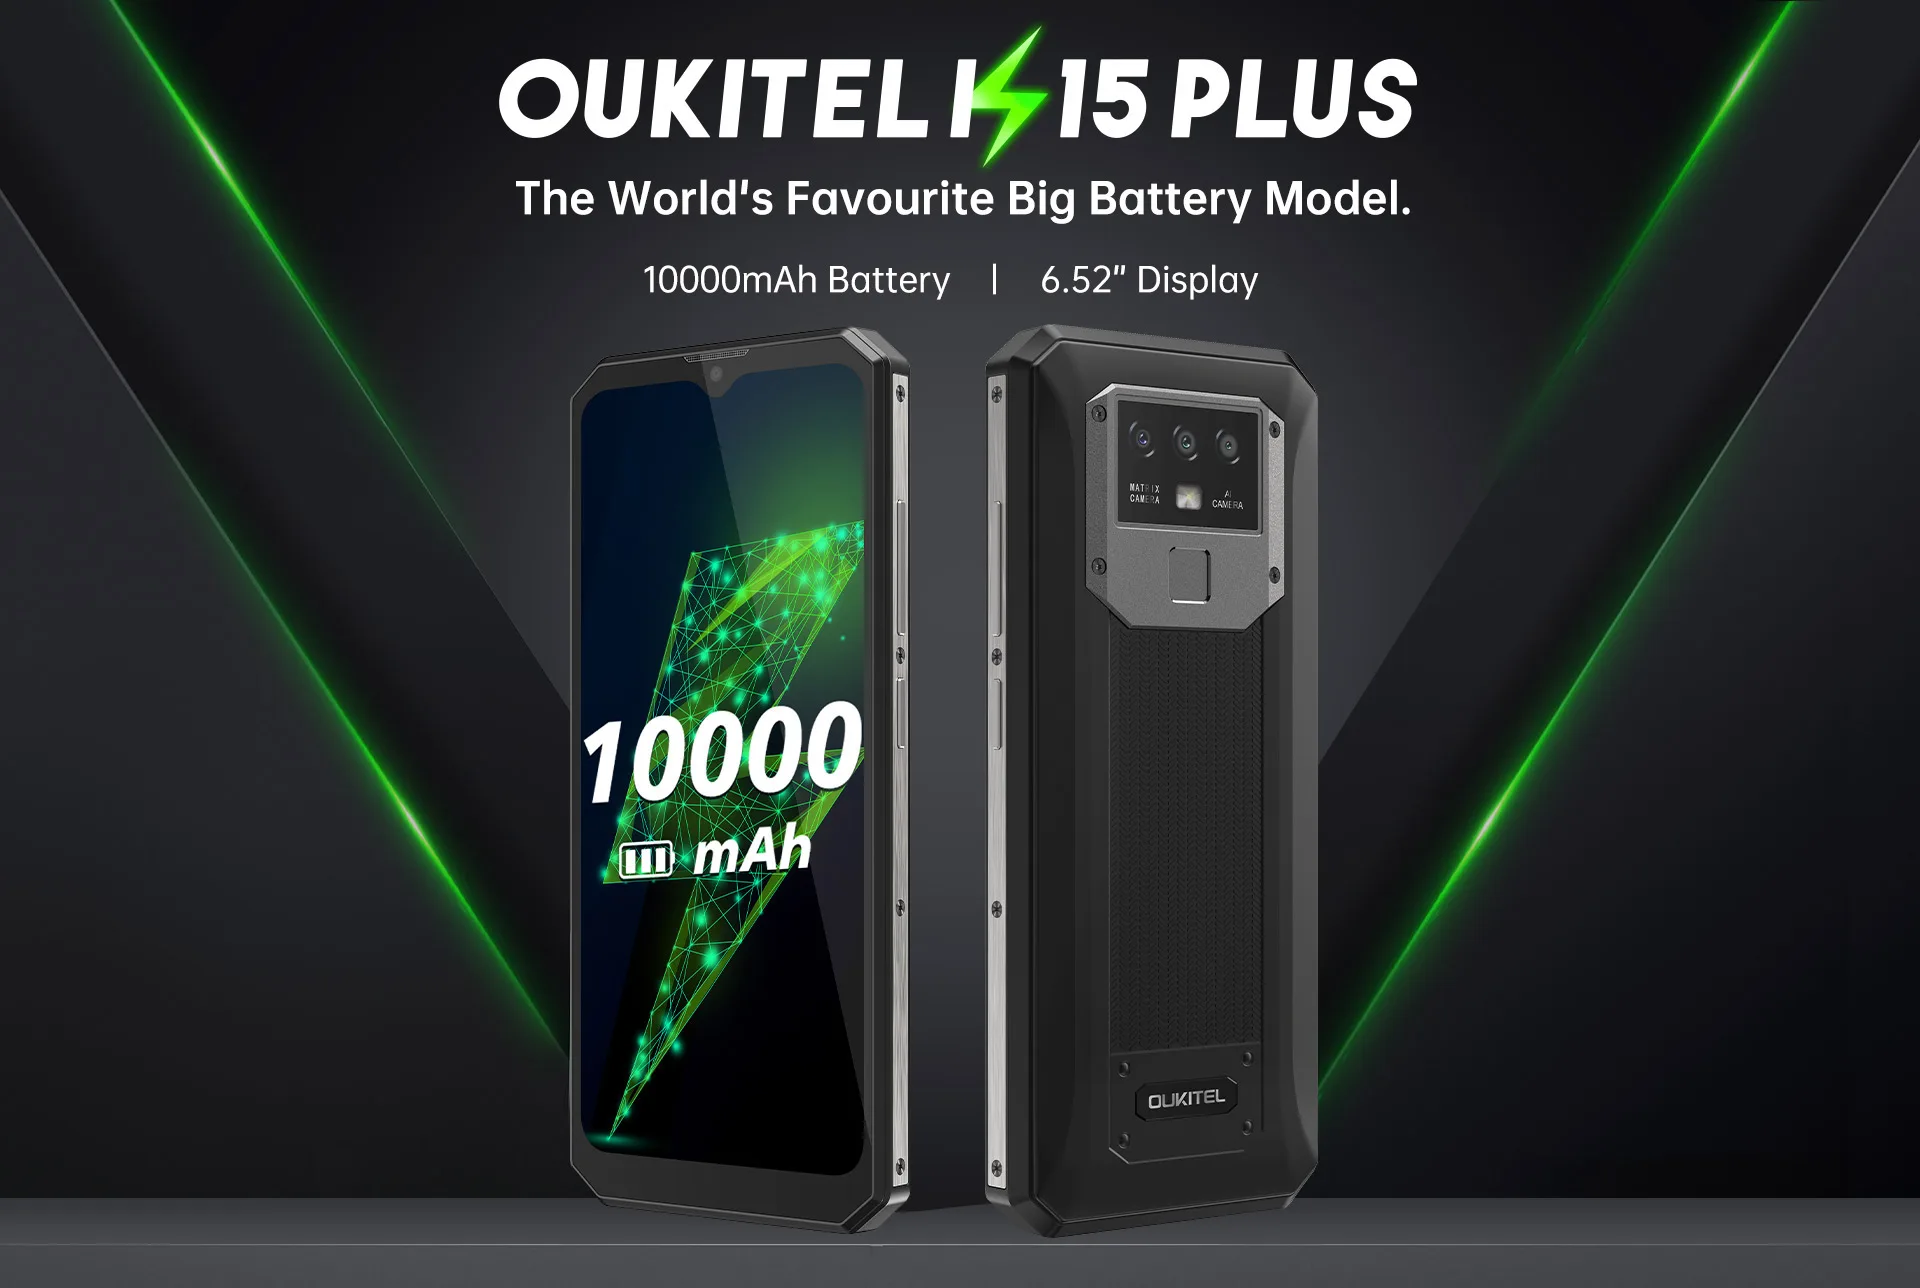 cellphones android OUKITEL K15 Plus 10000mAh Android 10.0 Smartphone 3GB+32GB 6.52'' Display 13MP Triple Rear Cameras NFC Mobile Phone cheap t mobile android phones